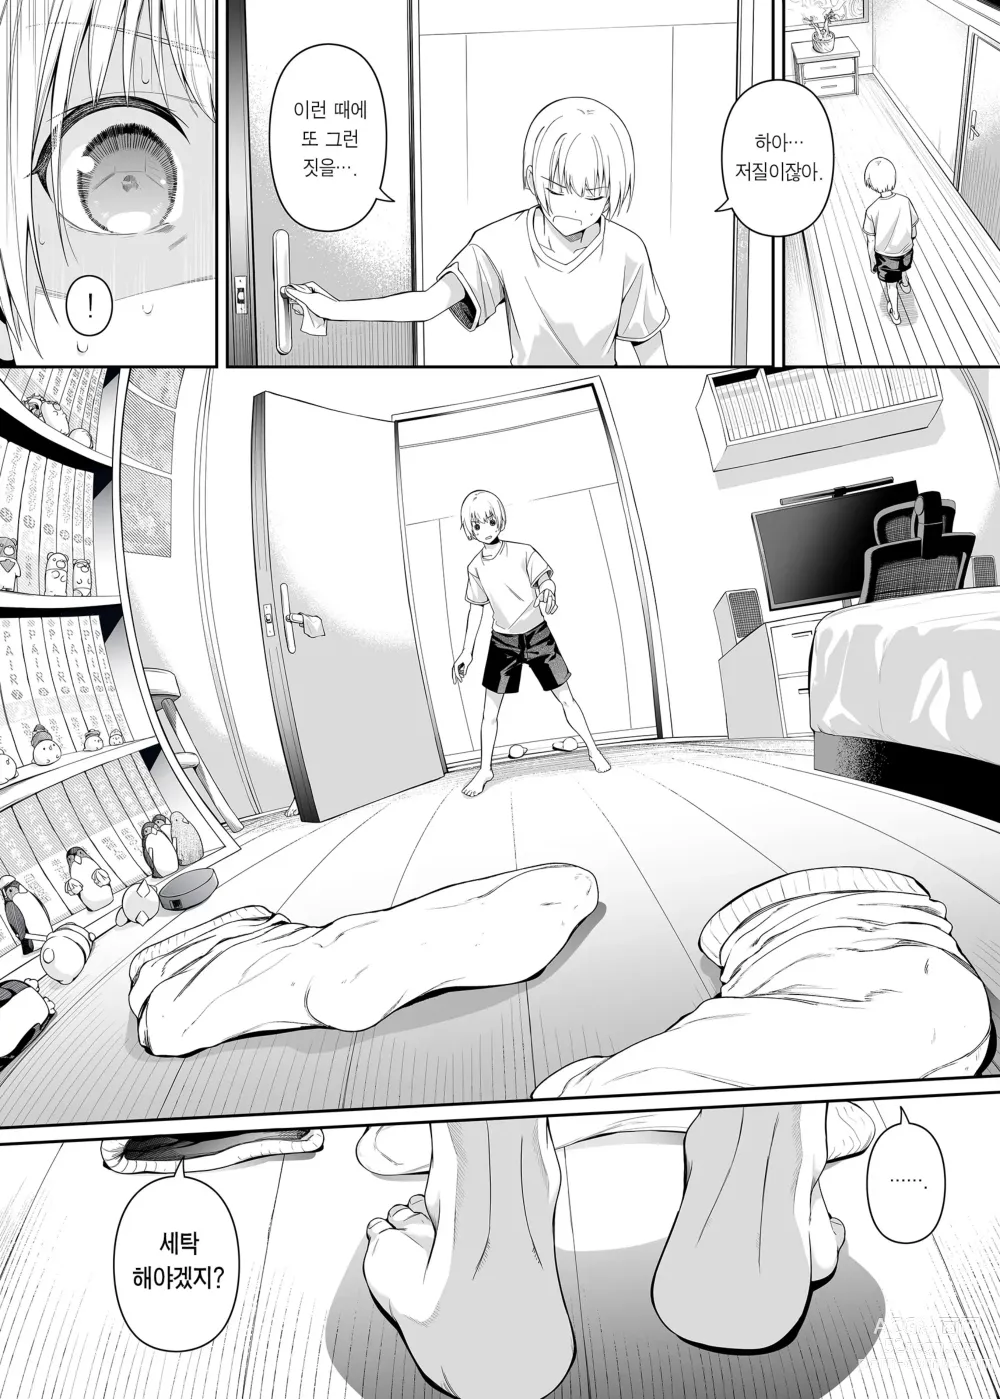 Page 9 of doujinshi 강박성 욕망